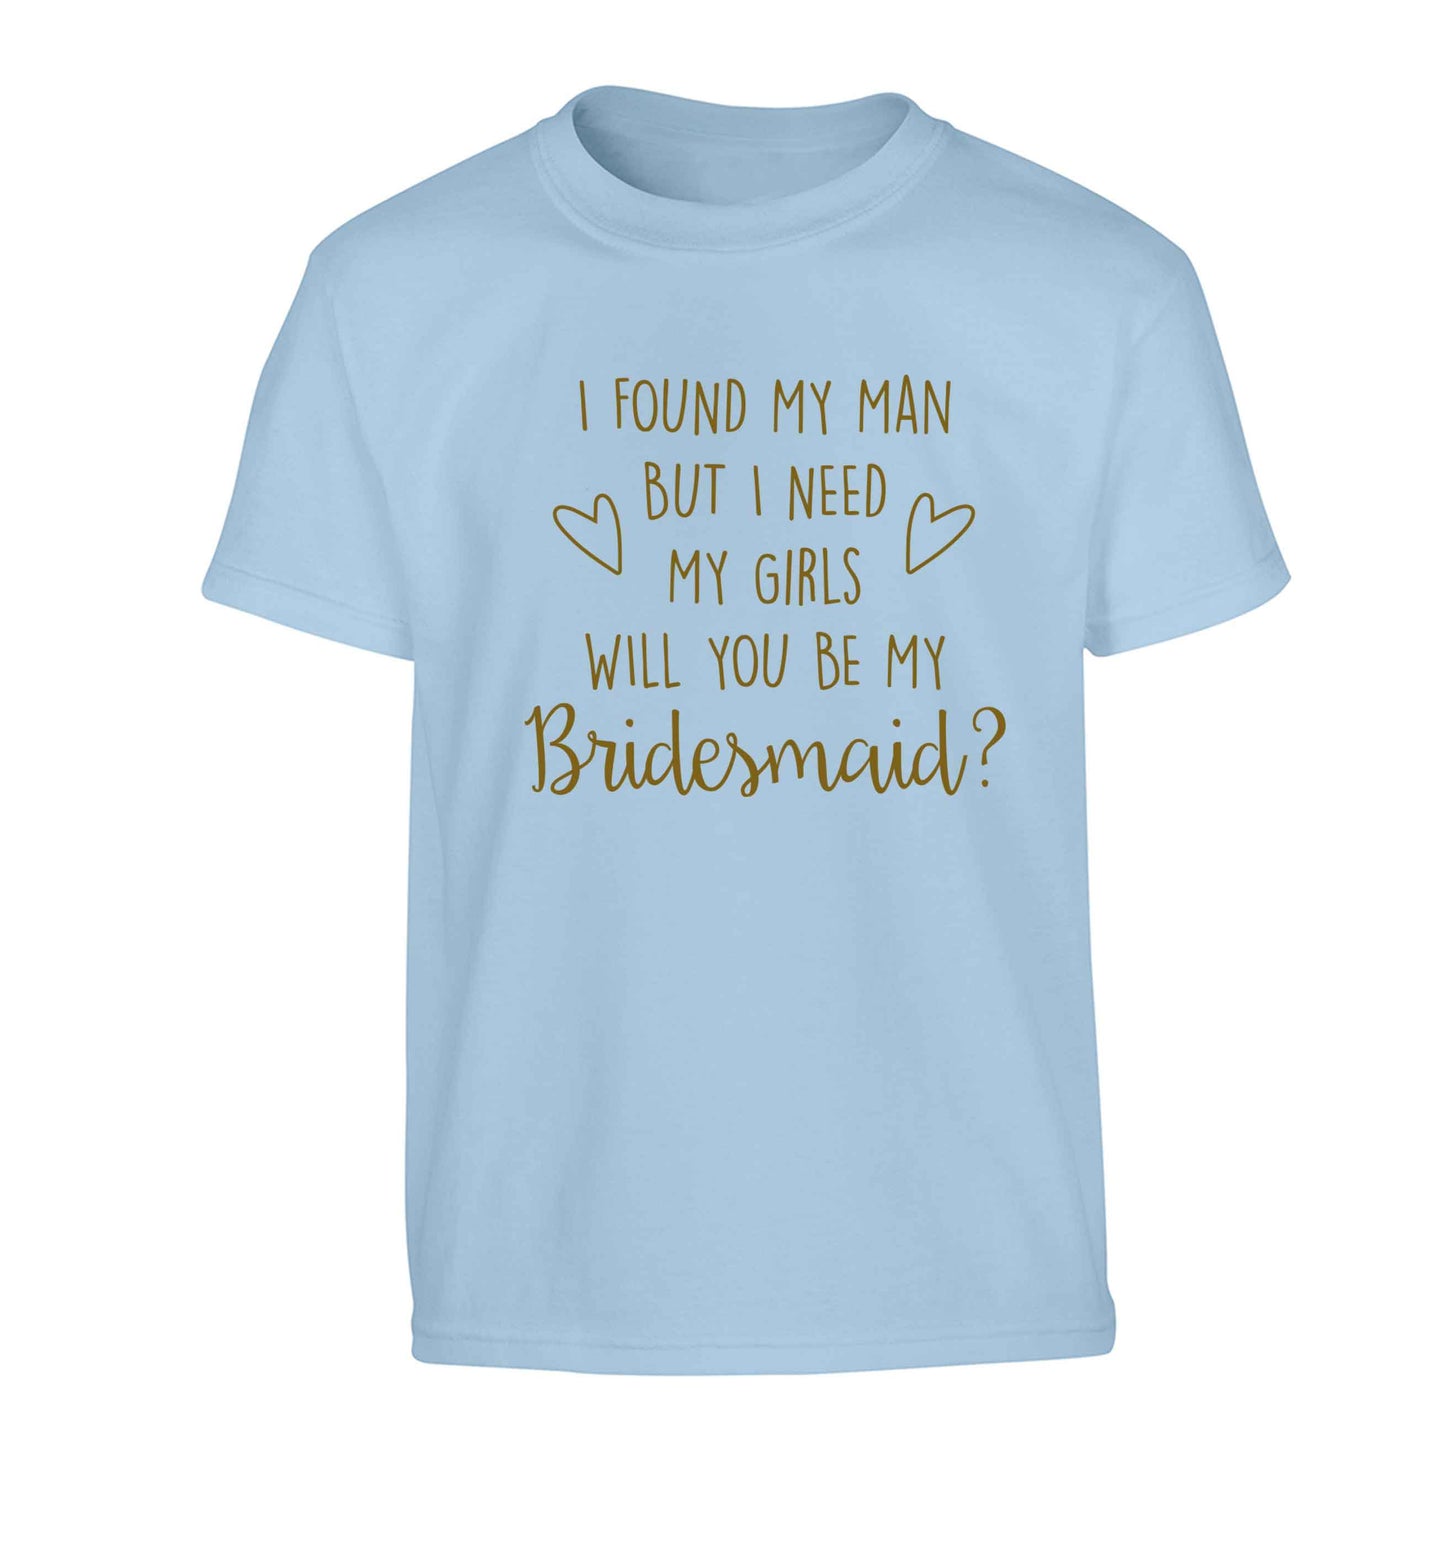 I found my man but I need my girls will you be my bridesmaid? Children's light blue Tshirt 12-13 Years